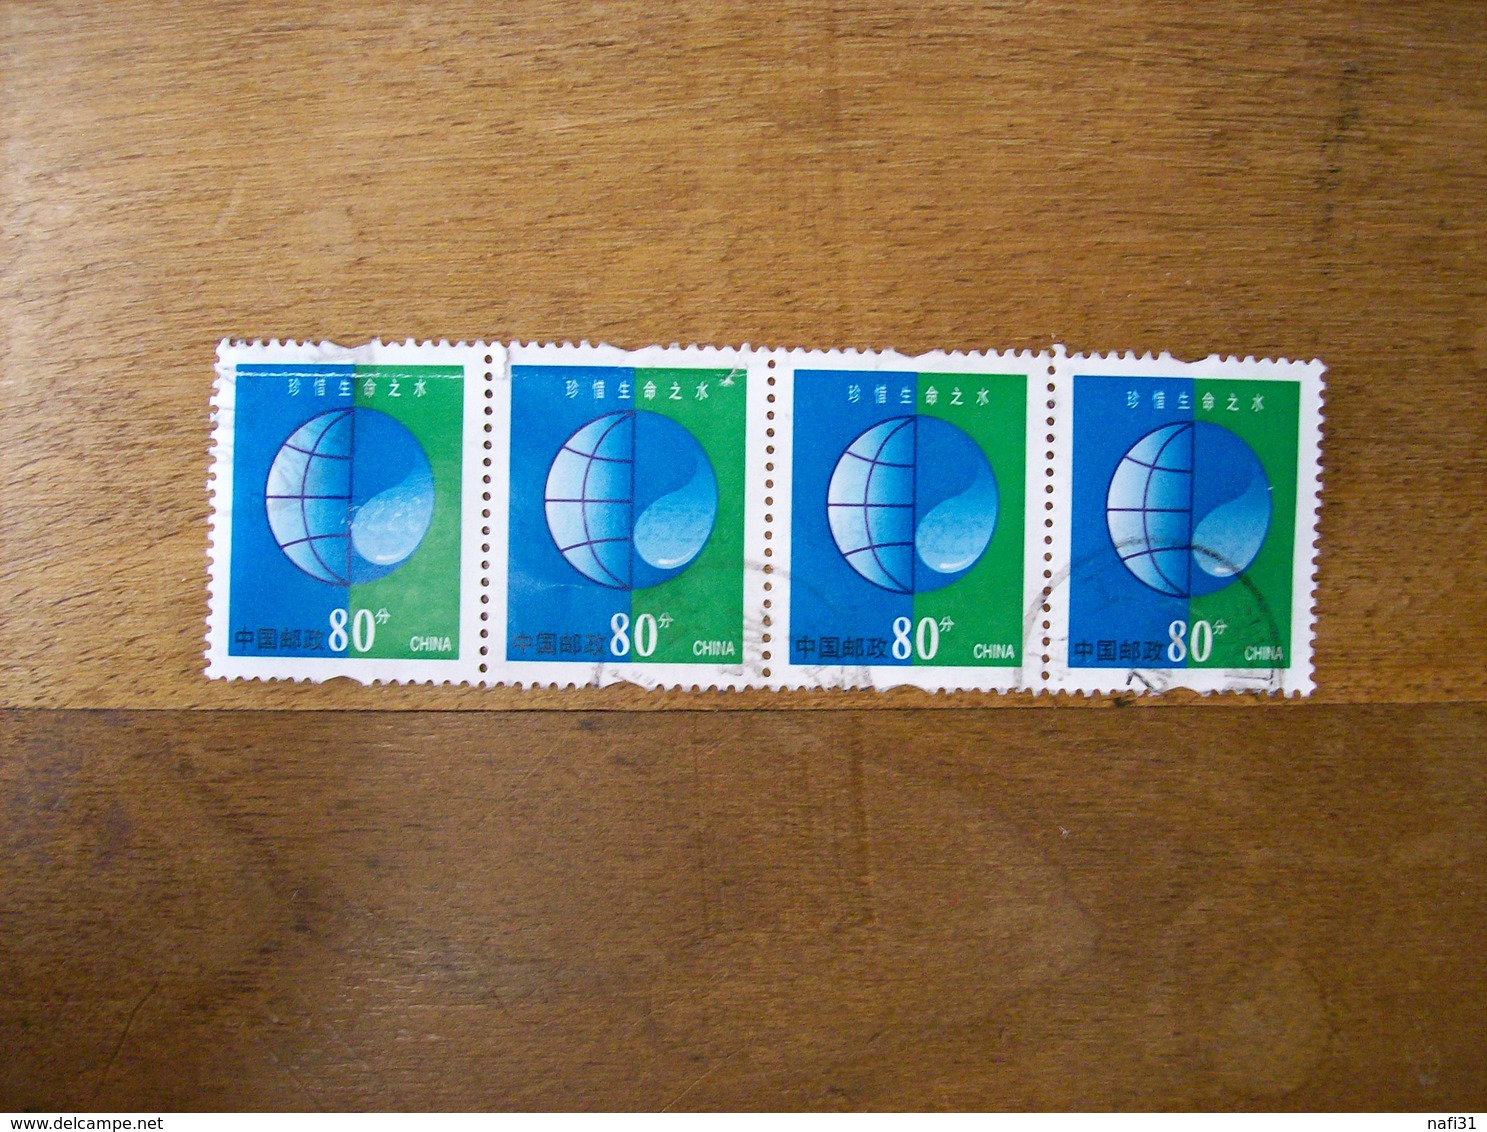 CHINE Tp A 0.80 Bande De 4 Ob Annee 2002 - Used Stamps